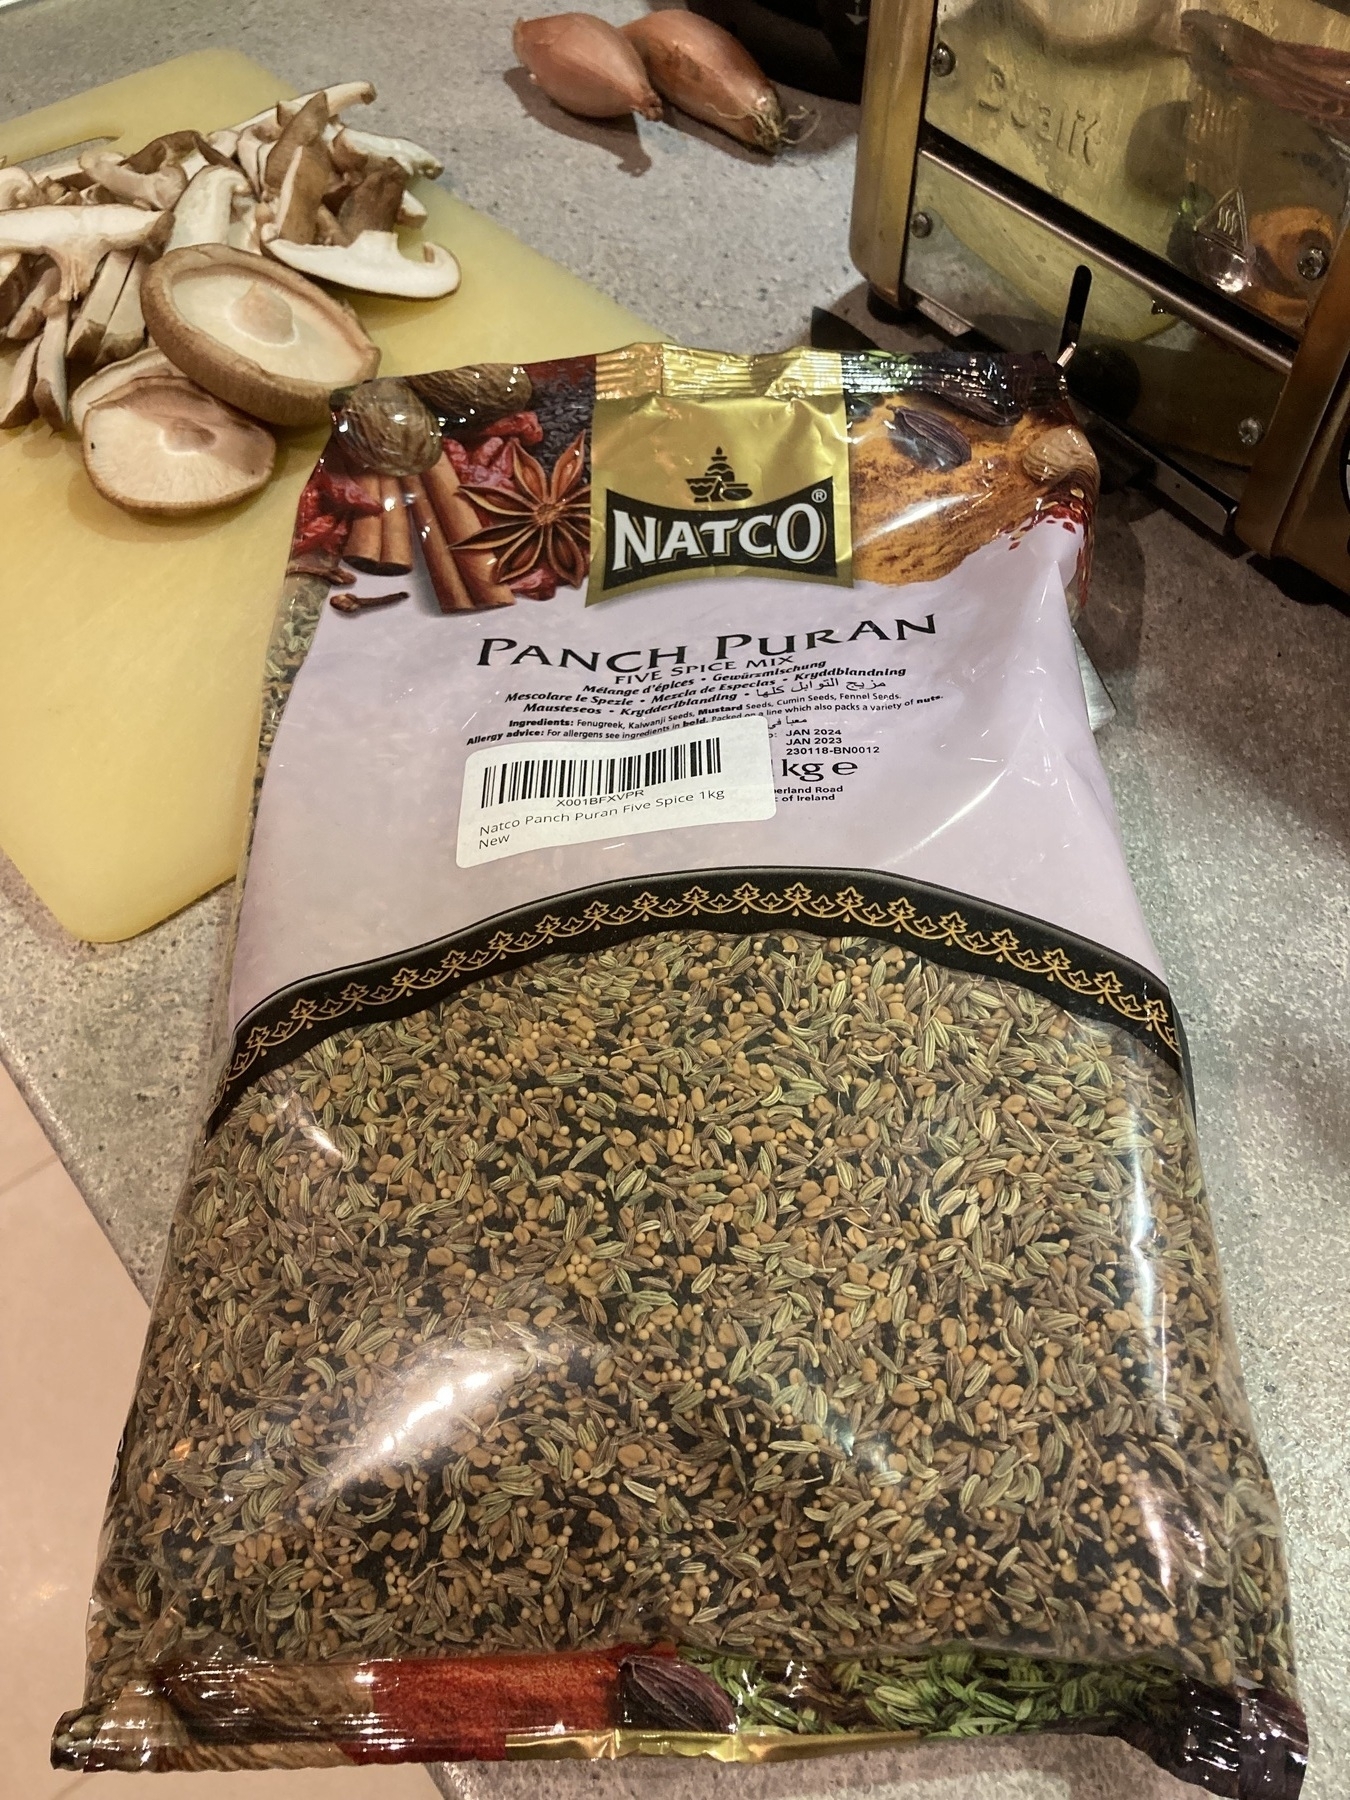 A large pack of Bengali 5 Spice on a chopping board with mushrooms.